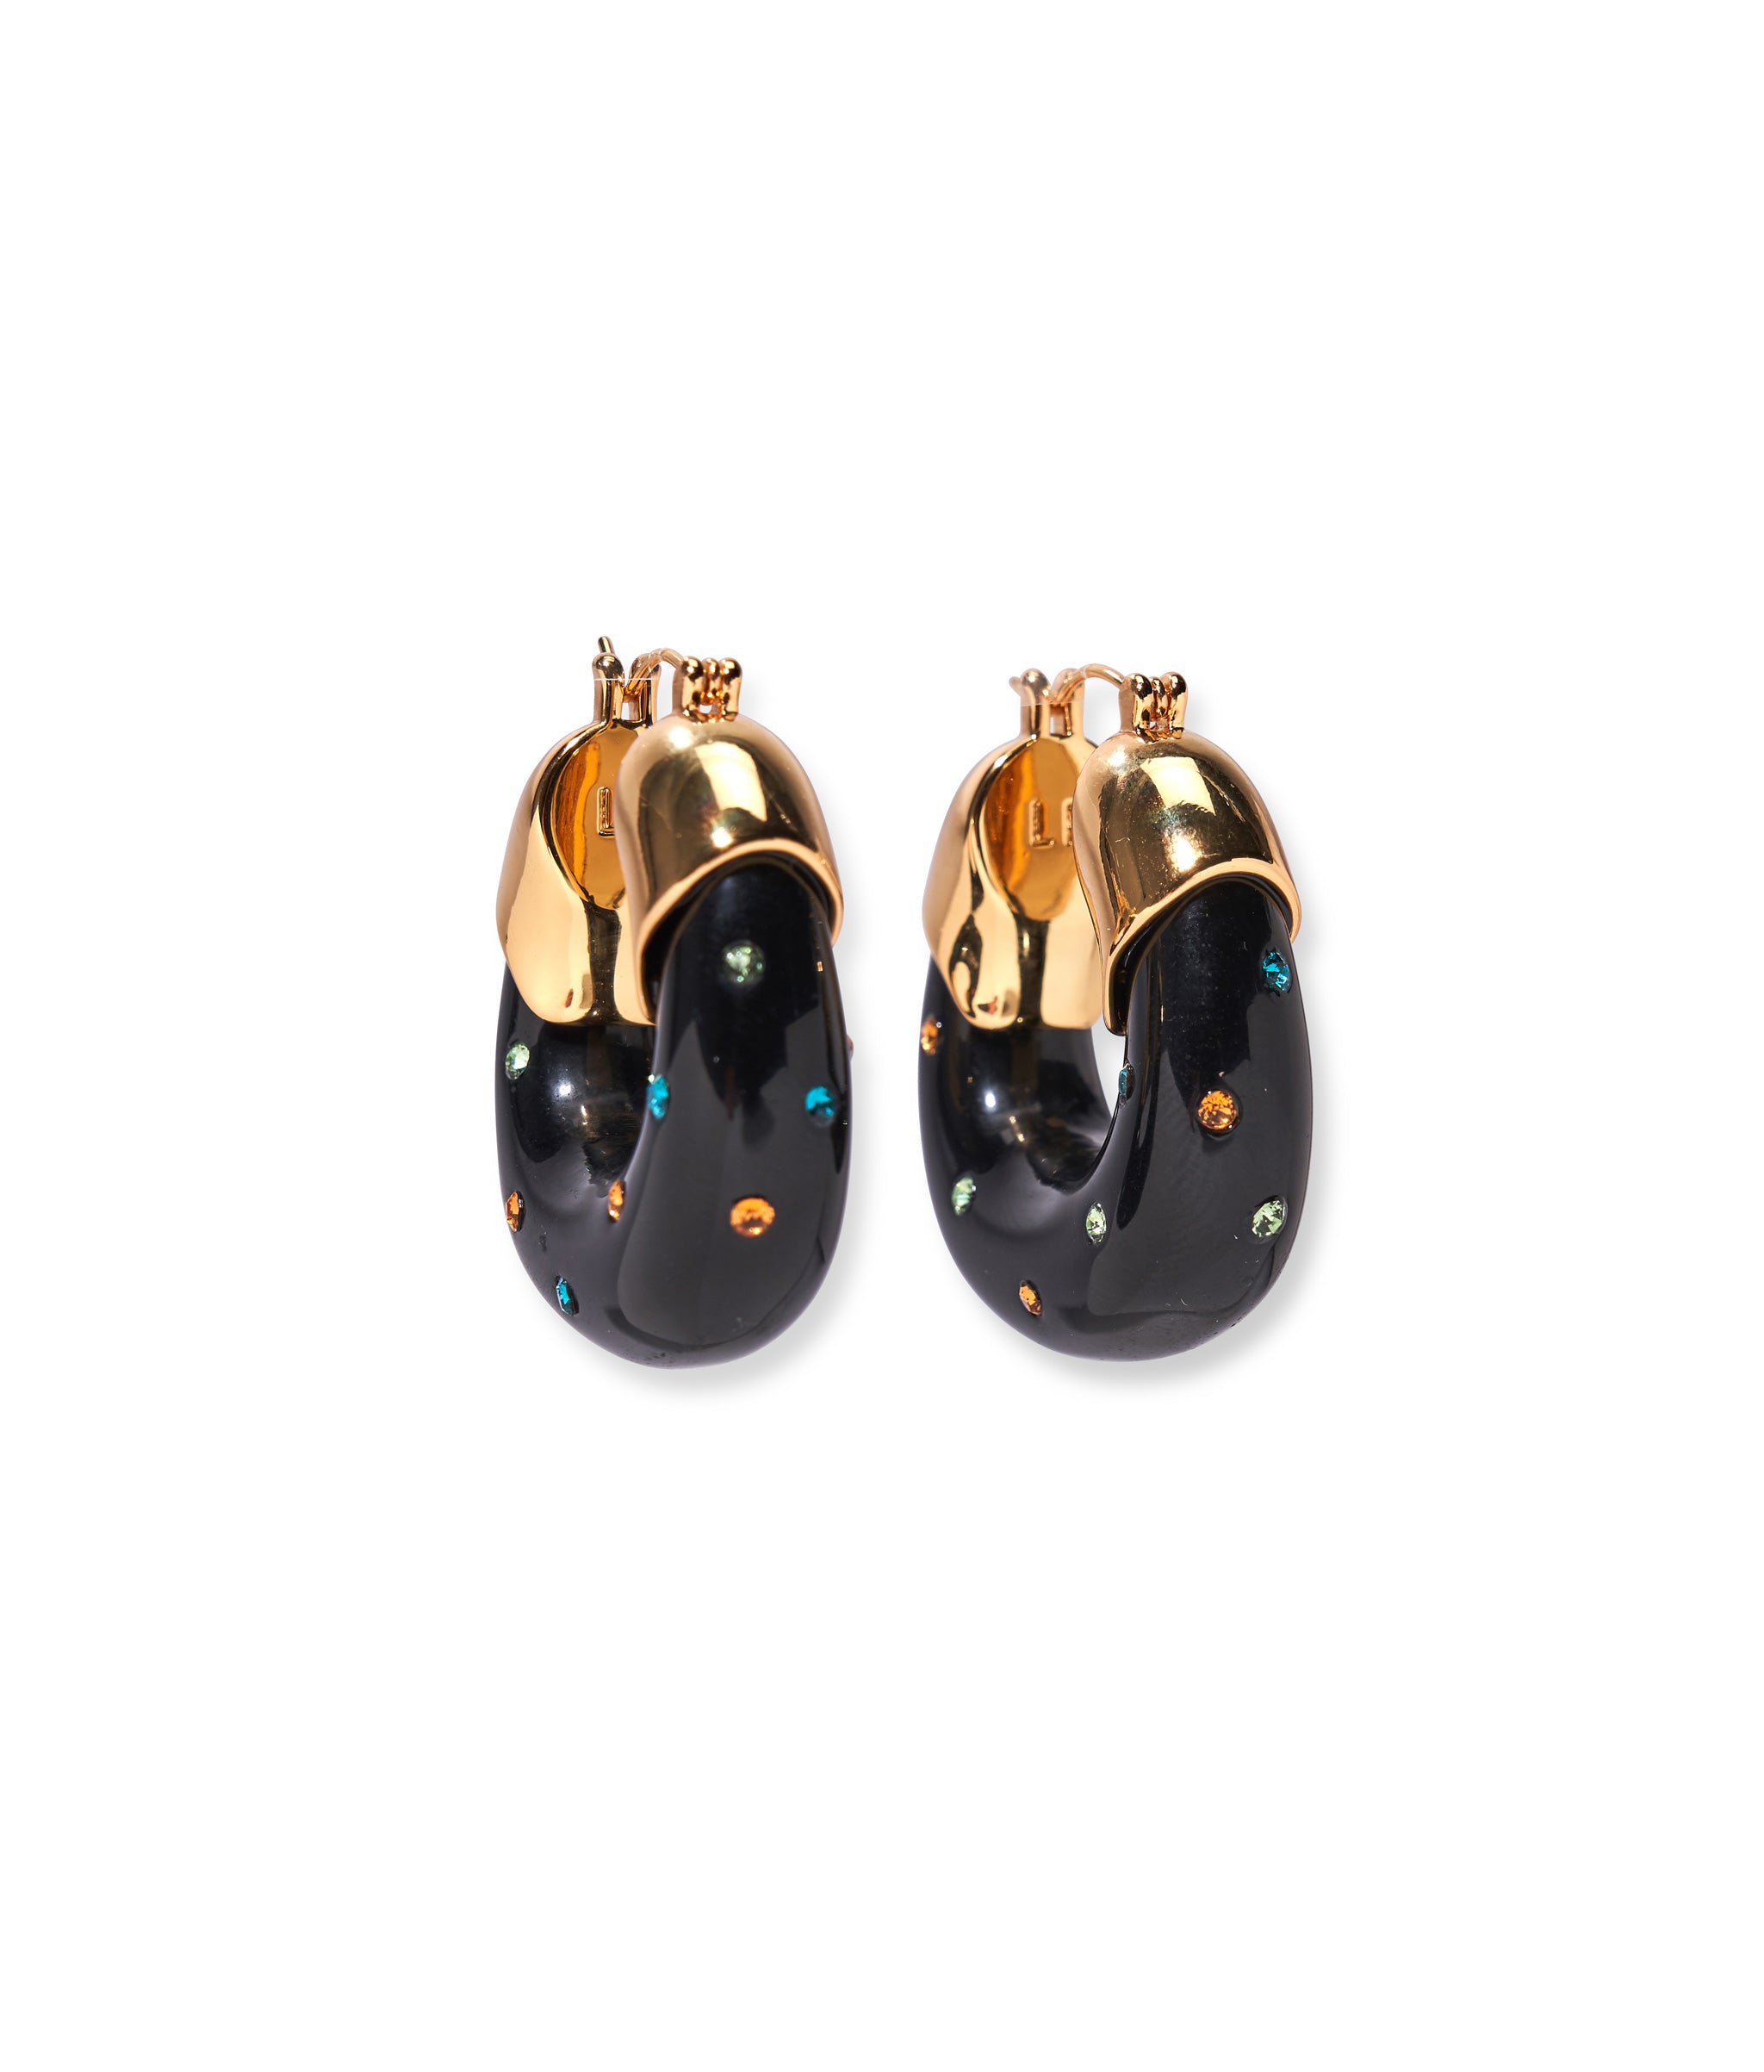 Organic Hoops in Studded Onyx. Gold-plated brass tops with black resin hoops inset with small multicolored crystals.